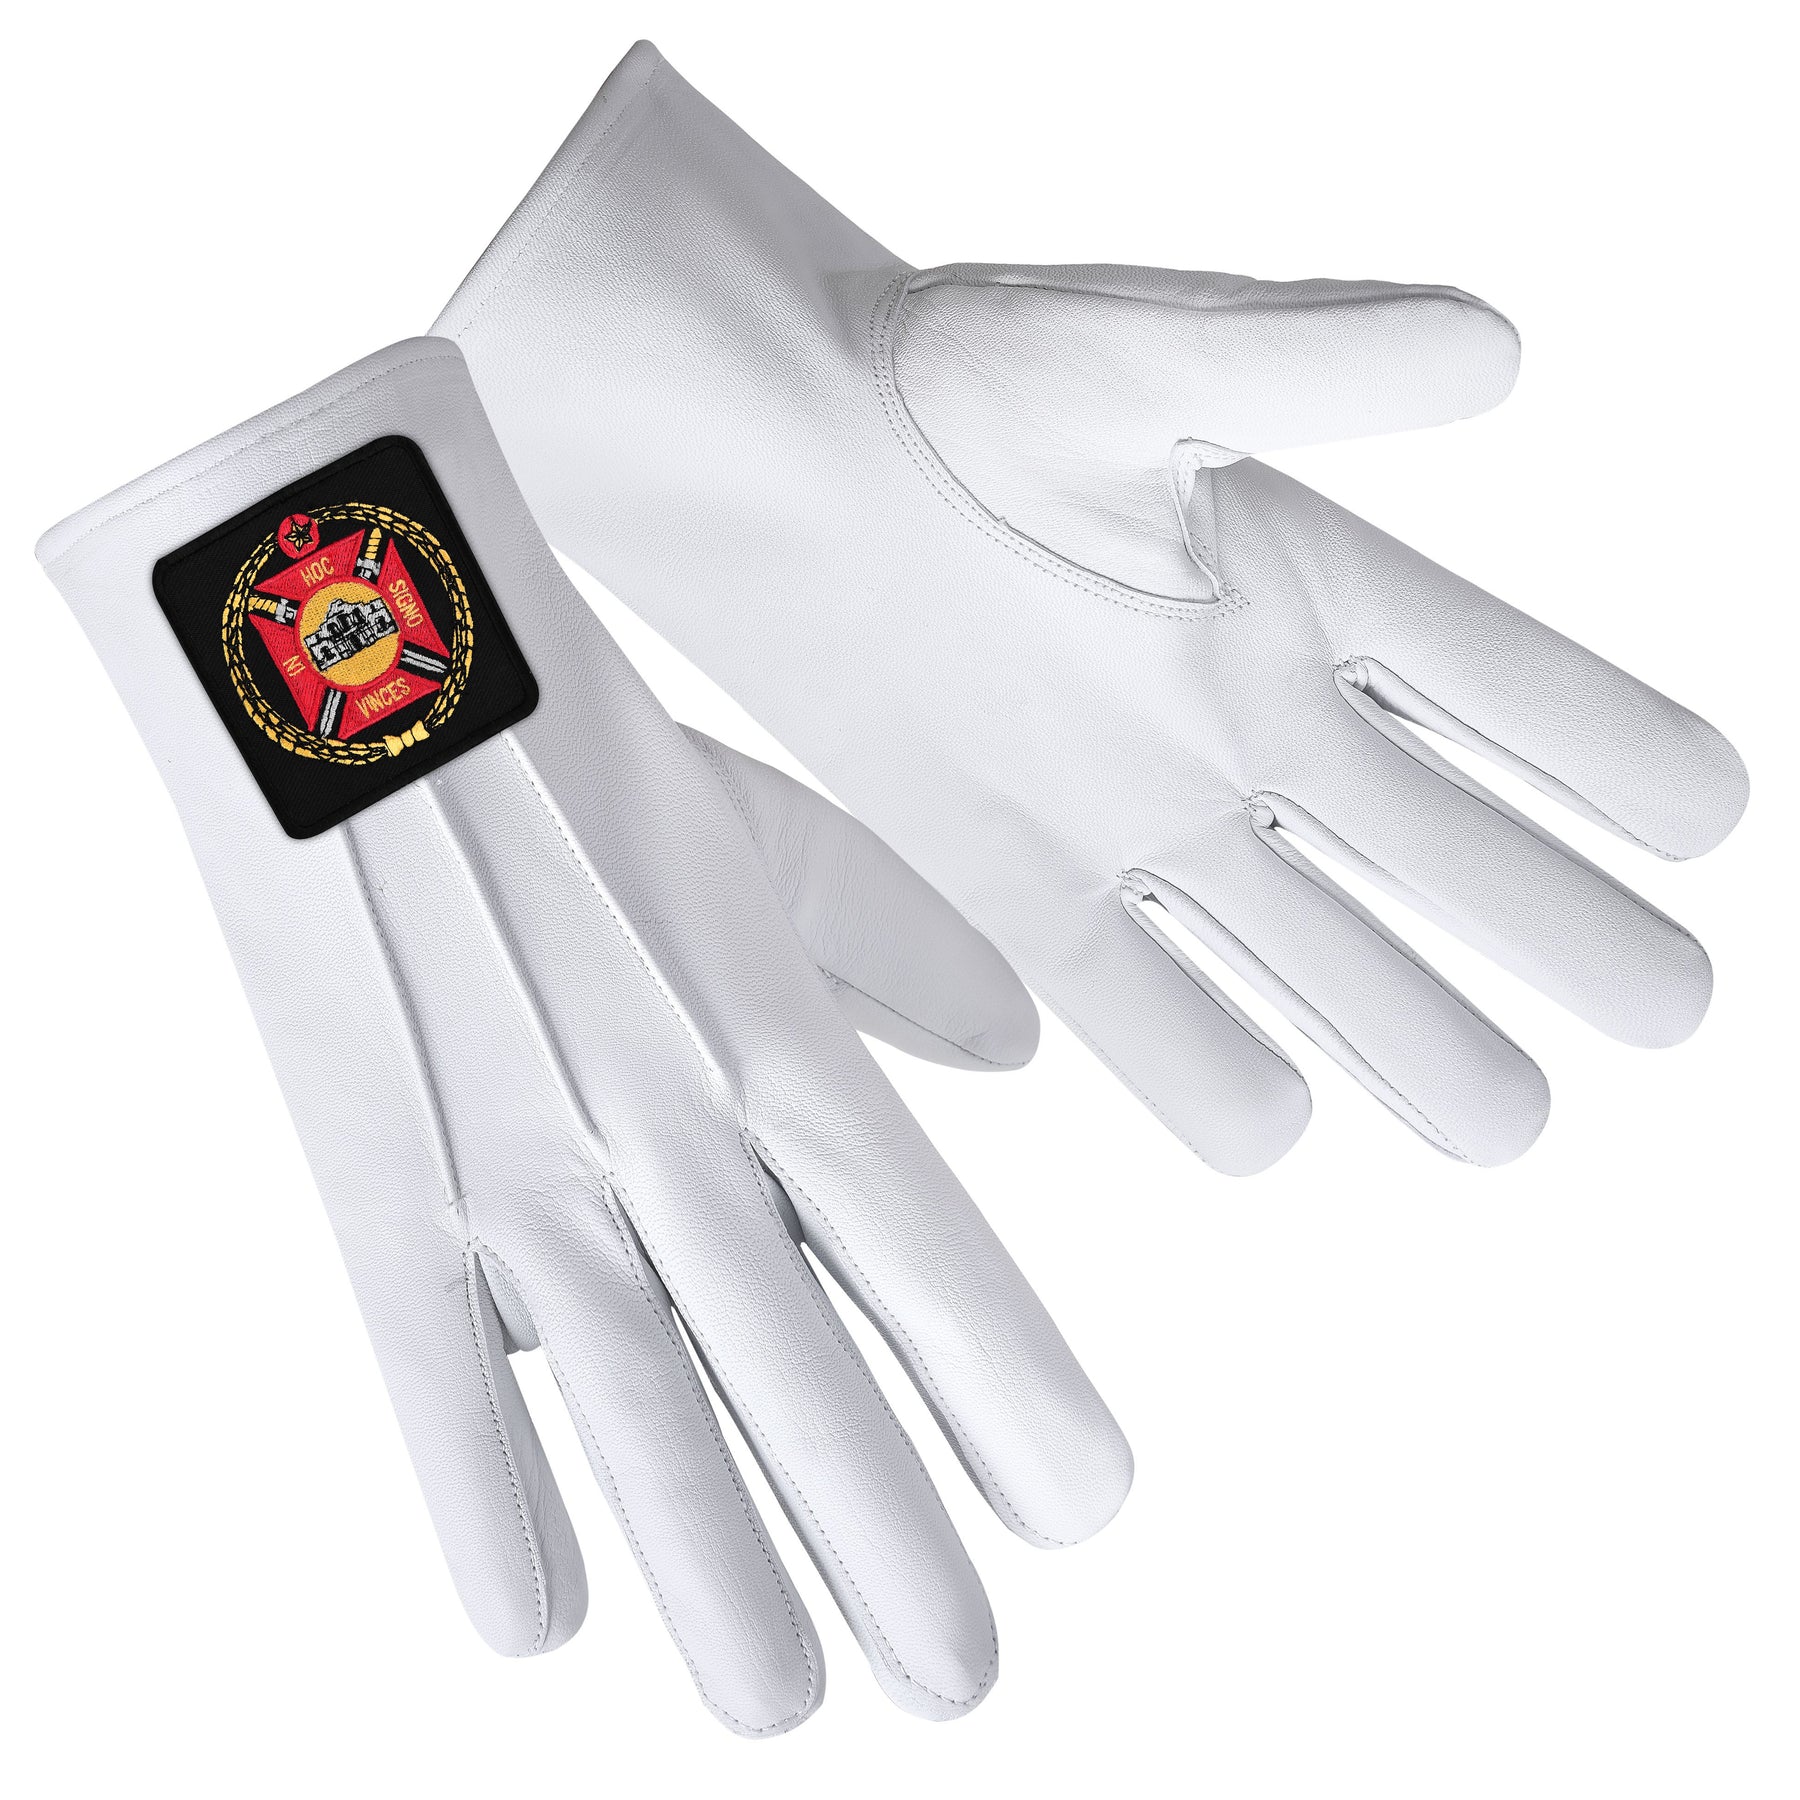 Knights Templar Commandery Glove - White Leather With Black Patch - Bricks Masons